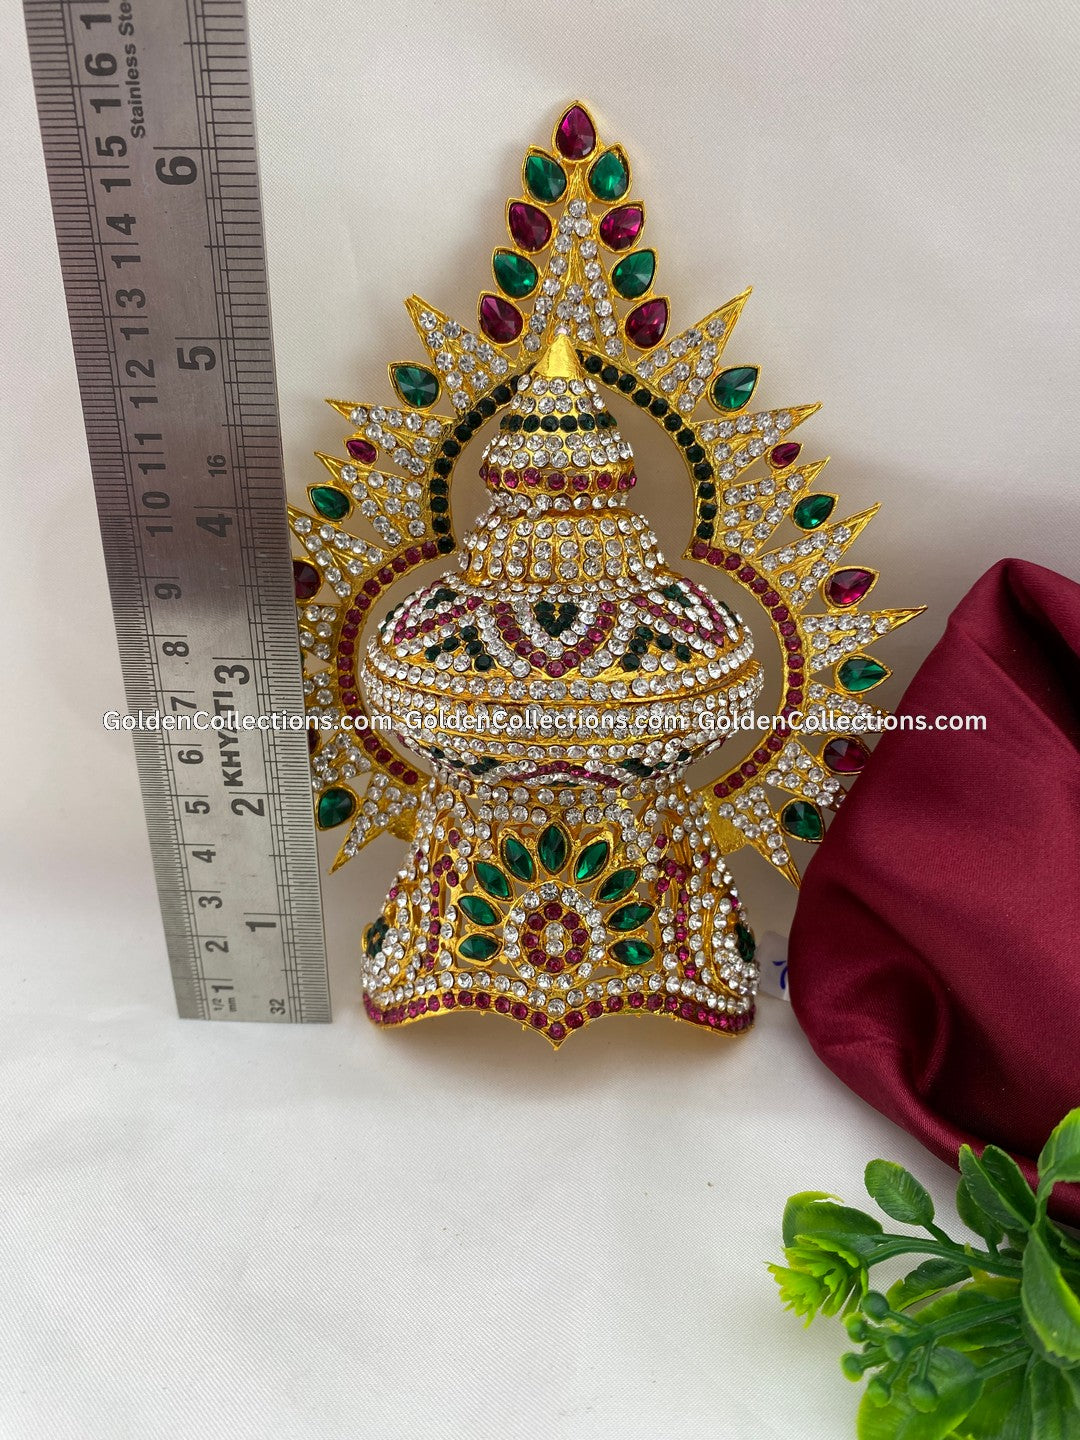 Ornate Crown for Hindu Deity - GoldenCollections DGC-097 2